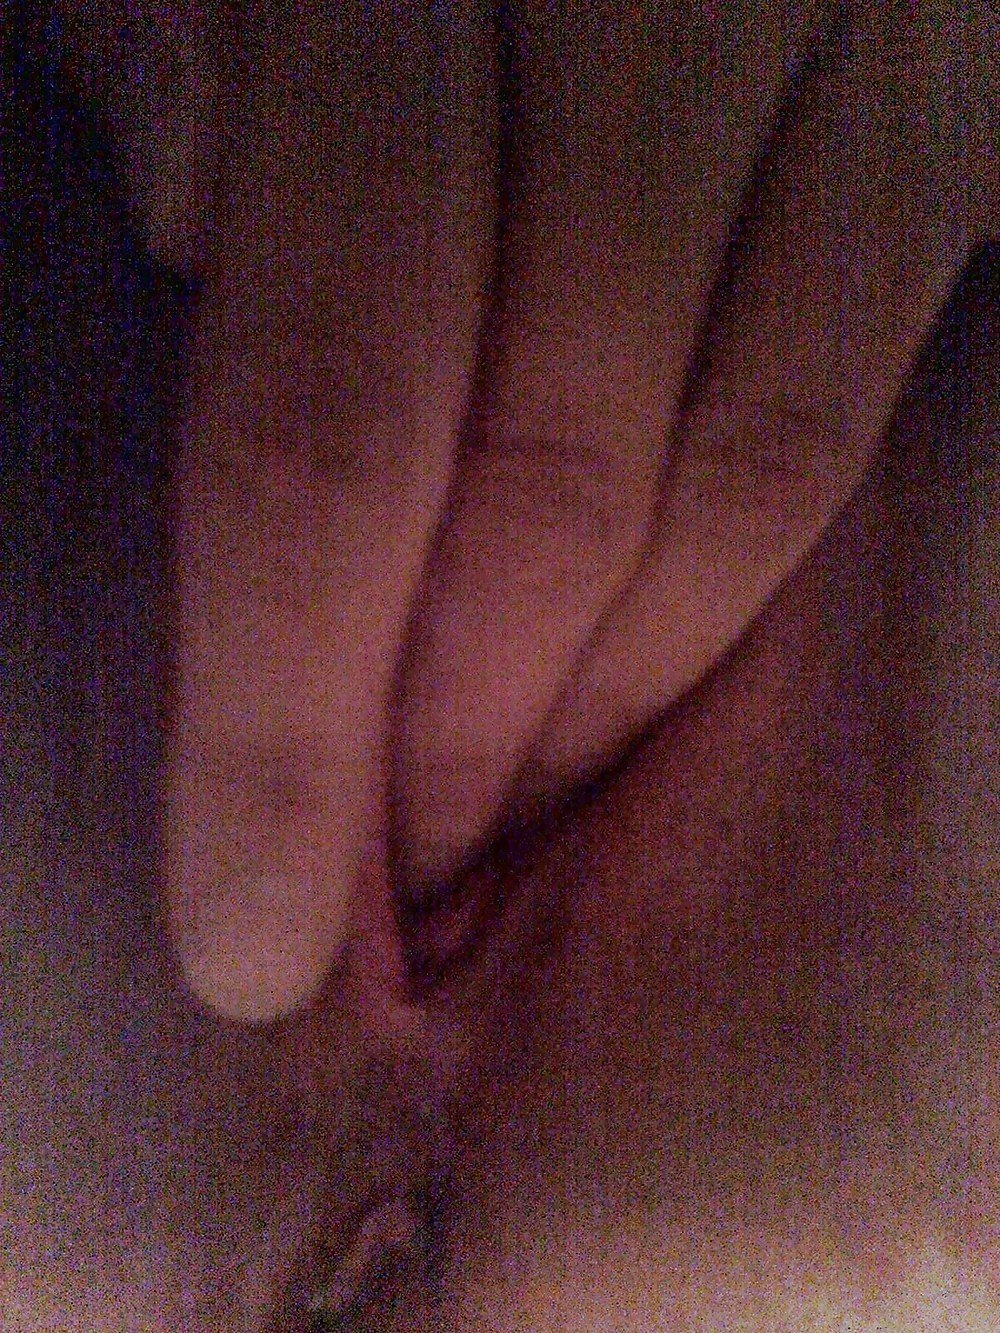 More cell shots of my cheating wife.  Feel free to comment #4788384